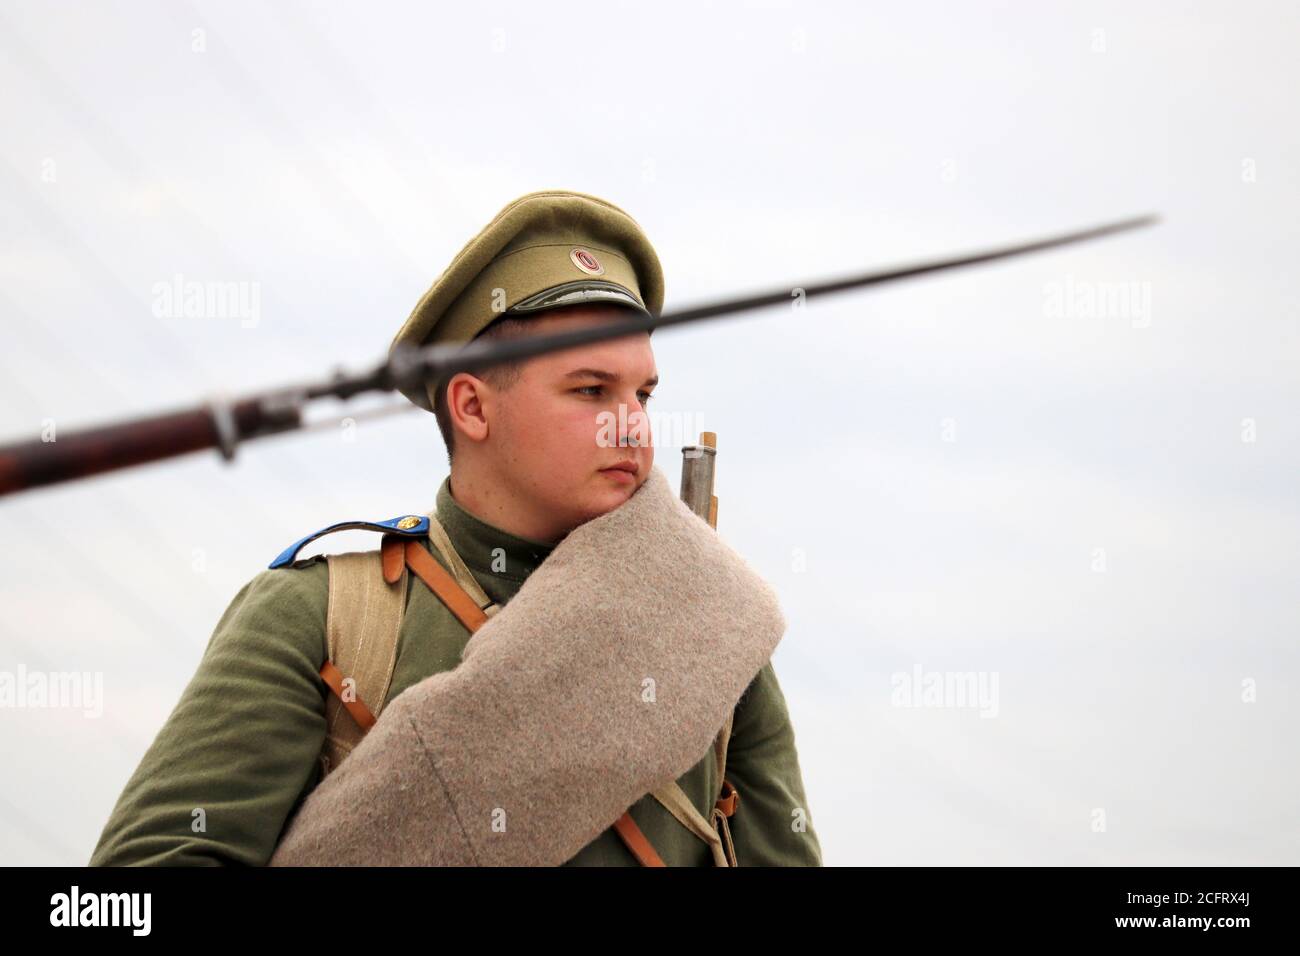 Soldier of the Russian Empire of early 20th century, view through the rifle with bayonet during the historical reconstruction of the World War I Stock Photo